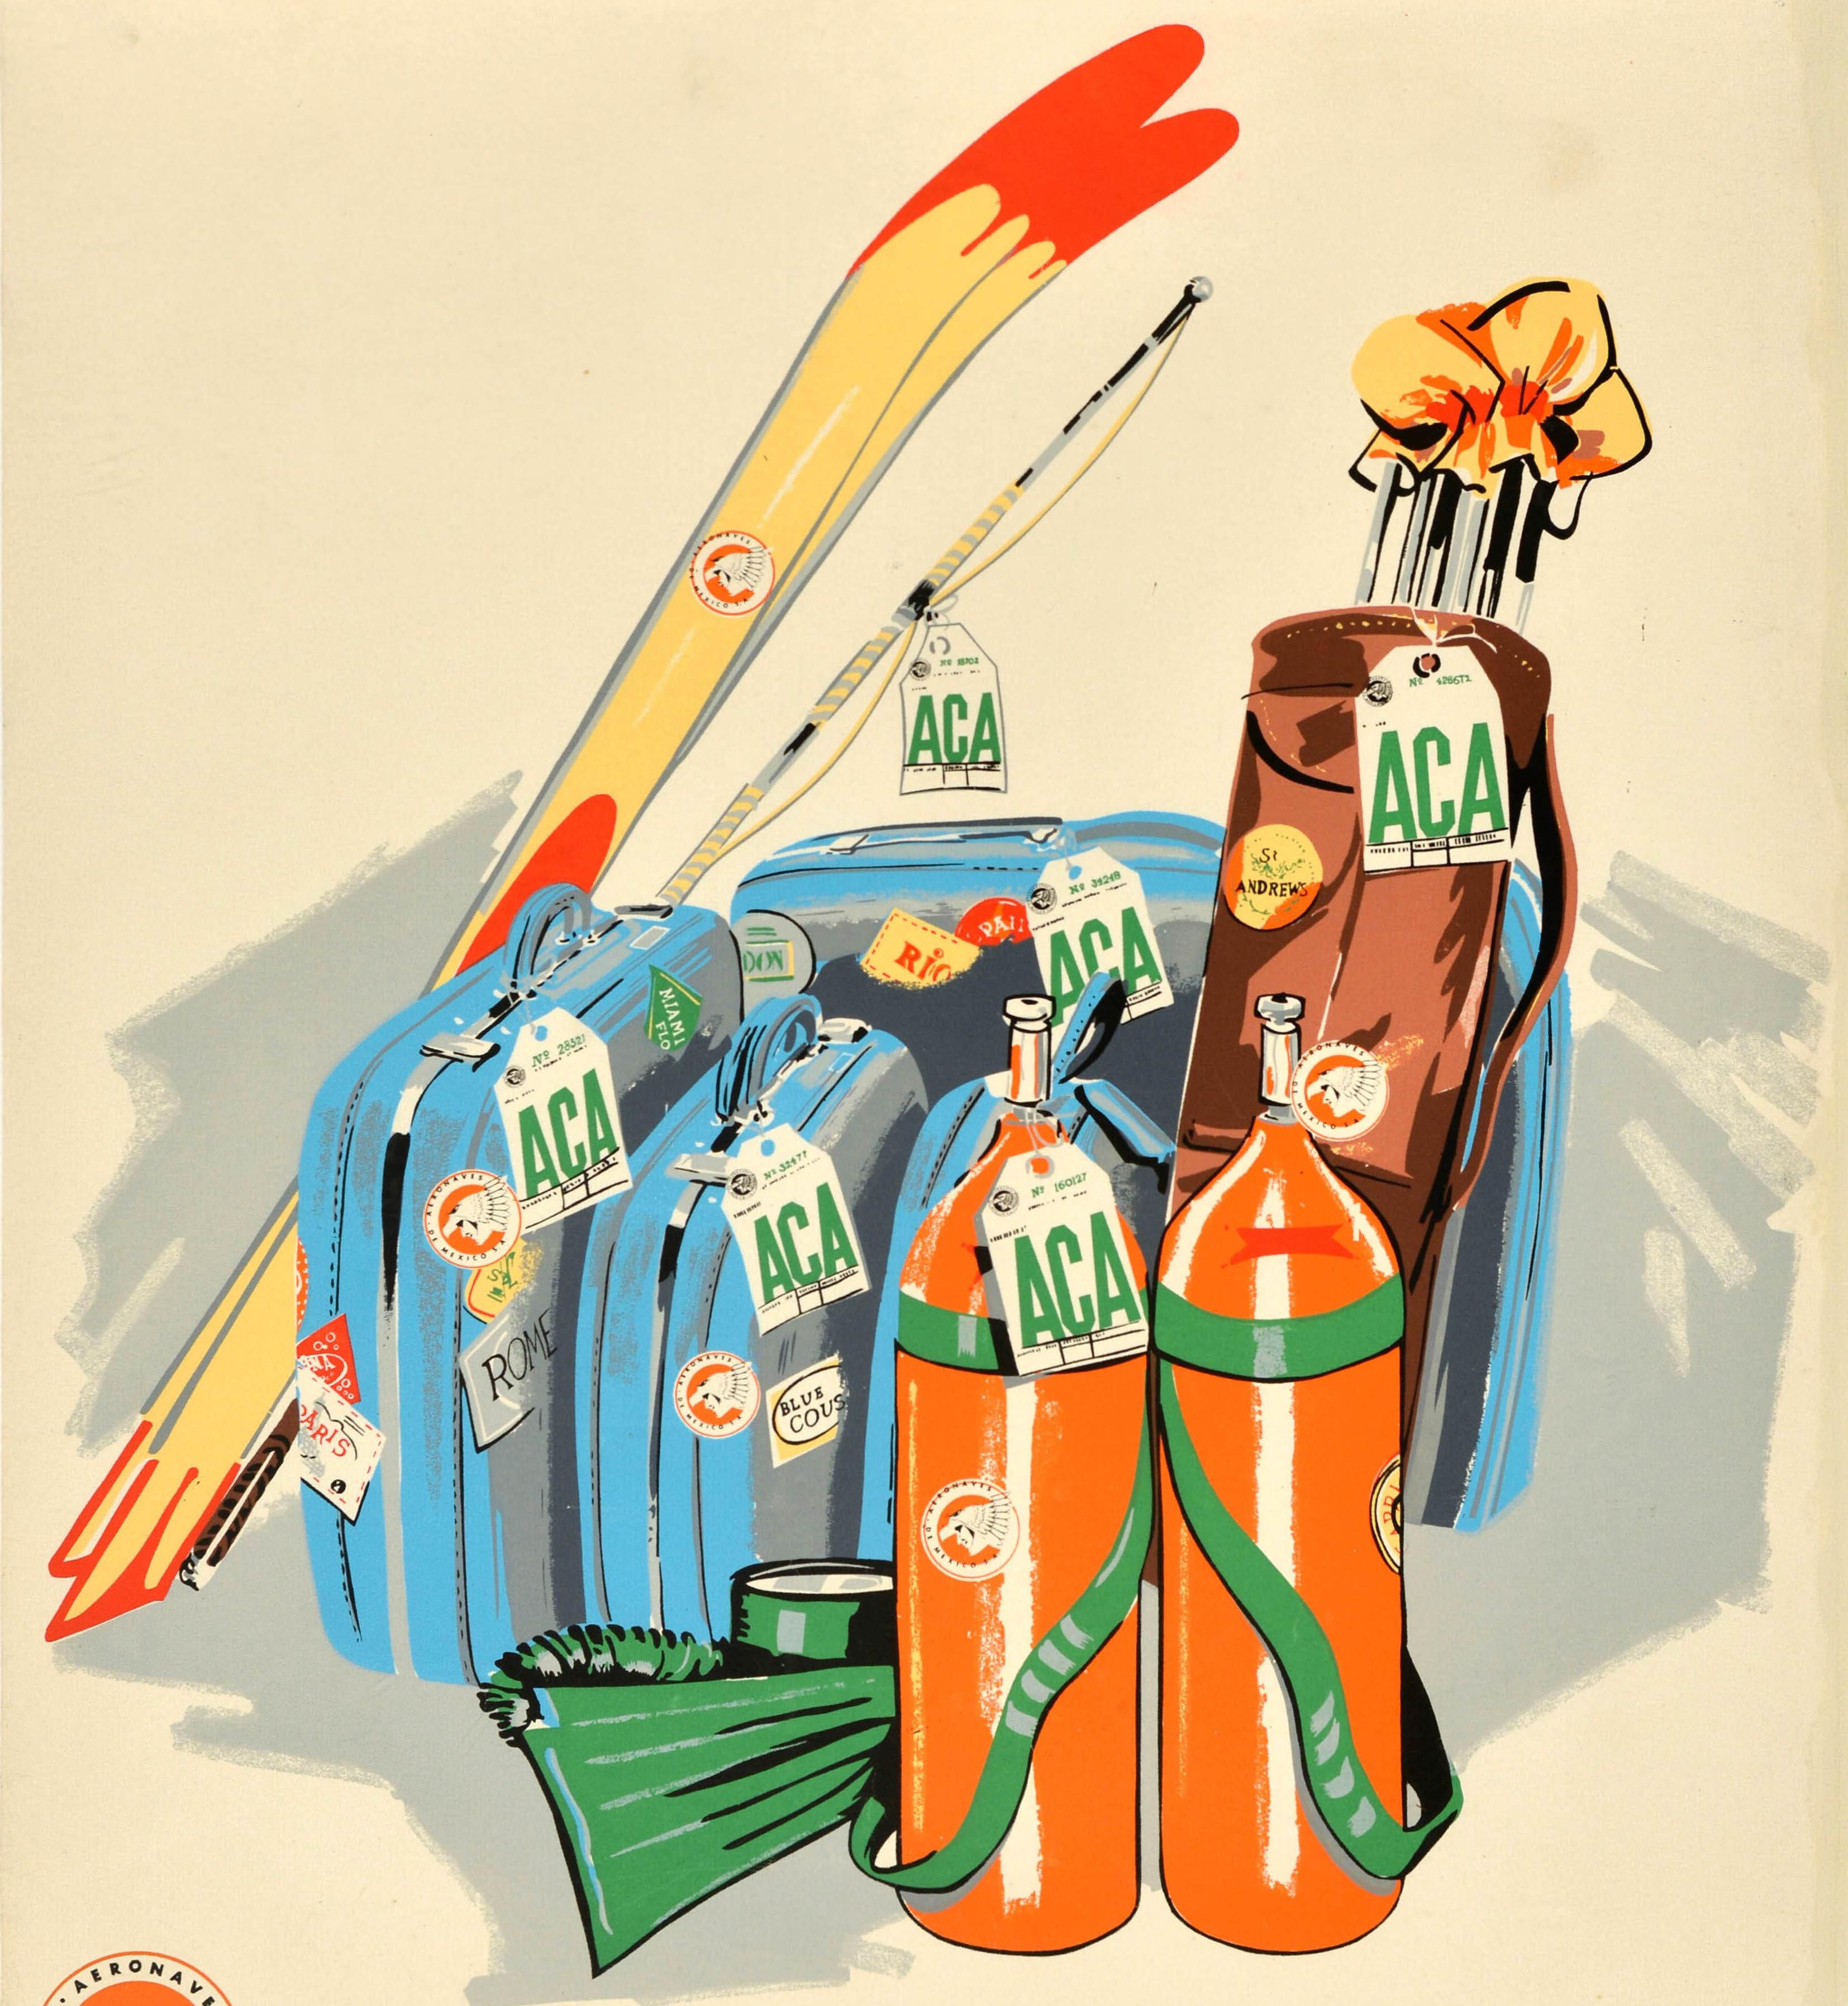 Original vintage air travel poster for Acapulco issued by Aeronaves De Mexico (Aeromexico; founded 1934) featuring a great image depicting scuba diving tanks and water sport equipment including a mask and fins with suitcases and bags, a golf set and